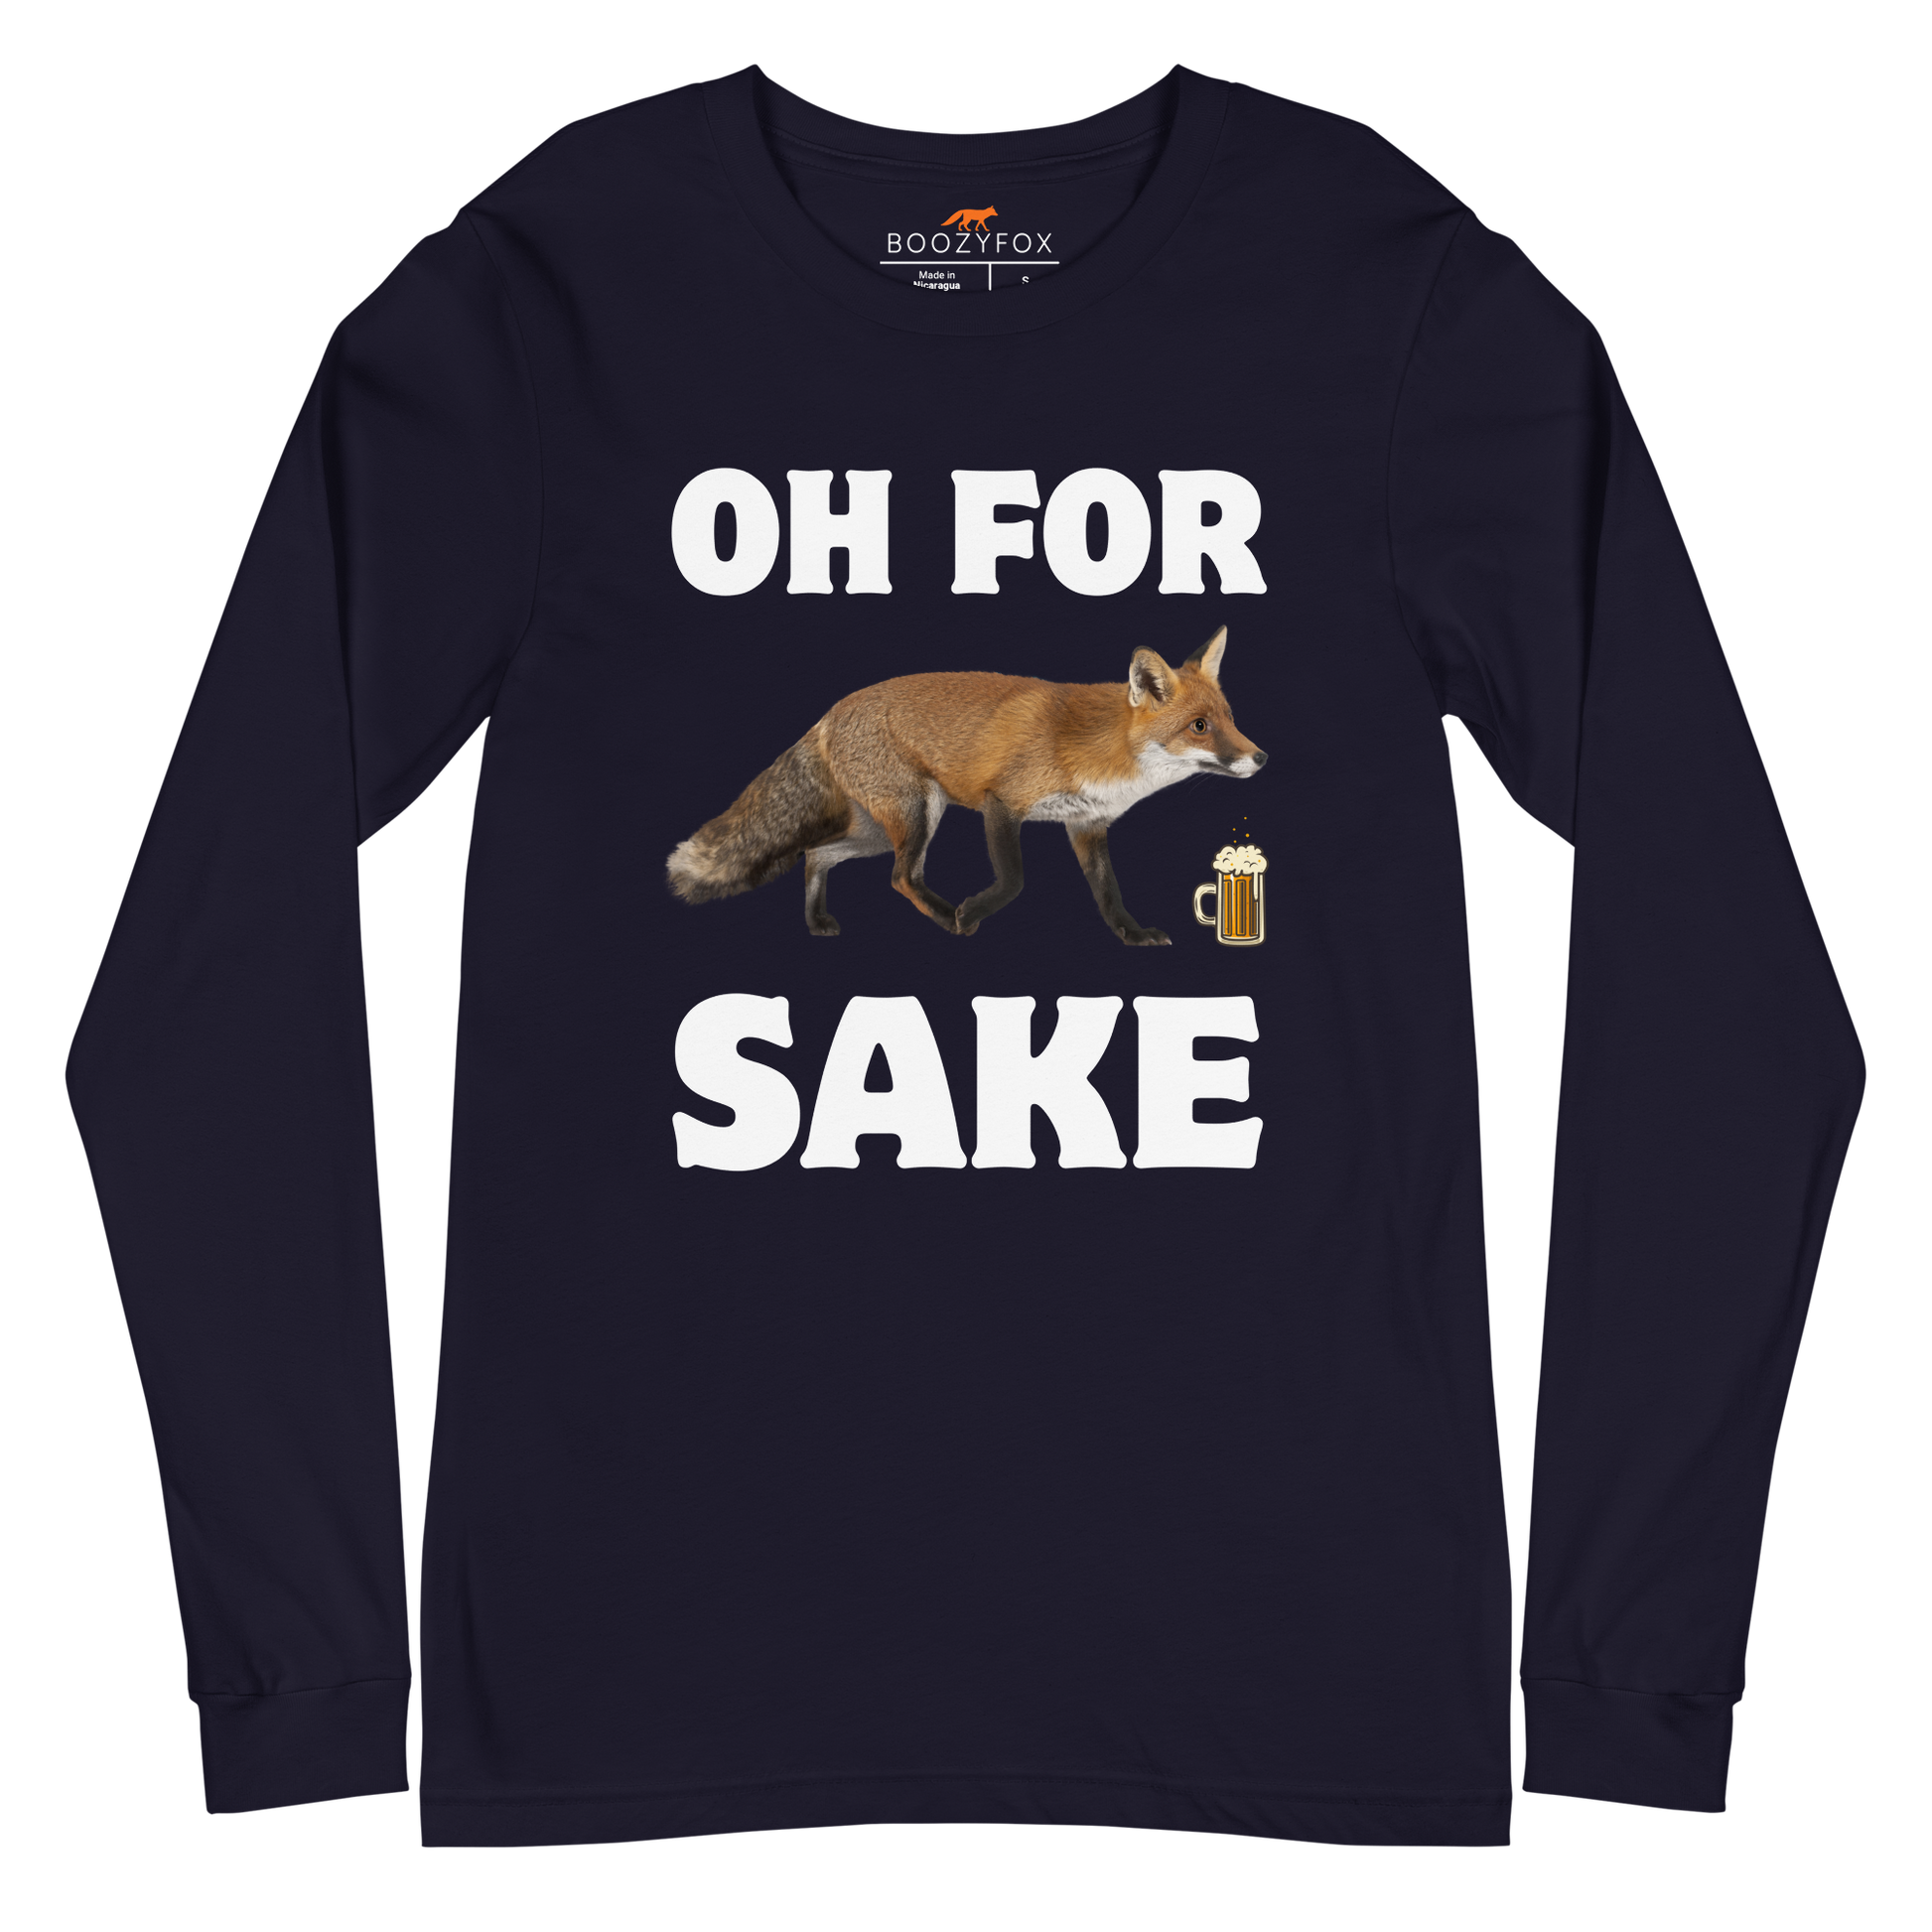 Navy Fox Long Sleeve Tee featuring a Oh For Fox Sake graphic on the chest - Funny Fox Long Sleeve Graphic Tees - Boozy Fox